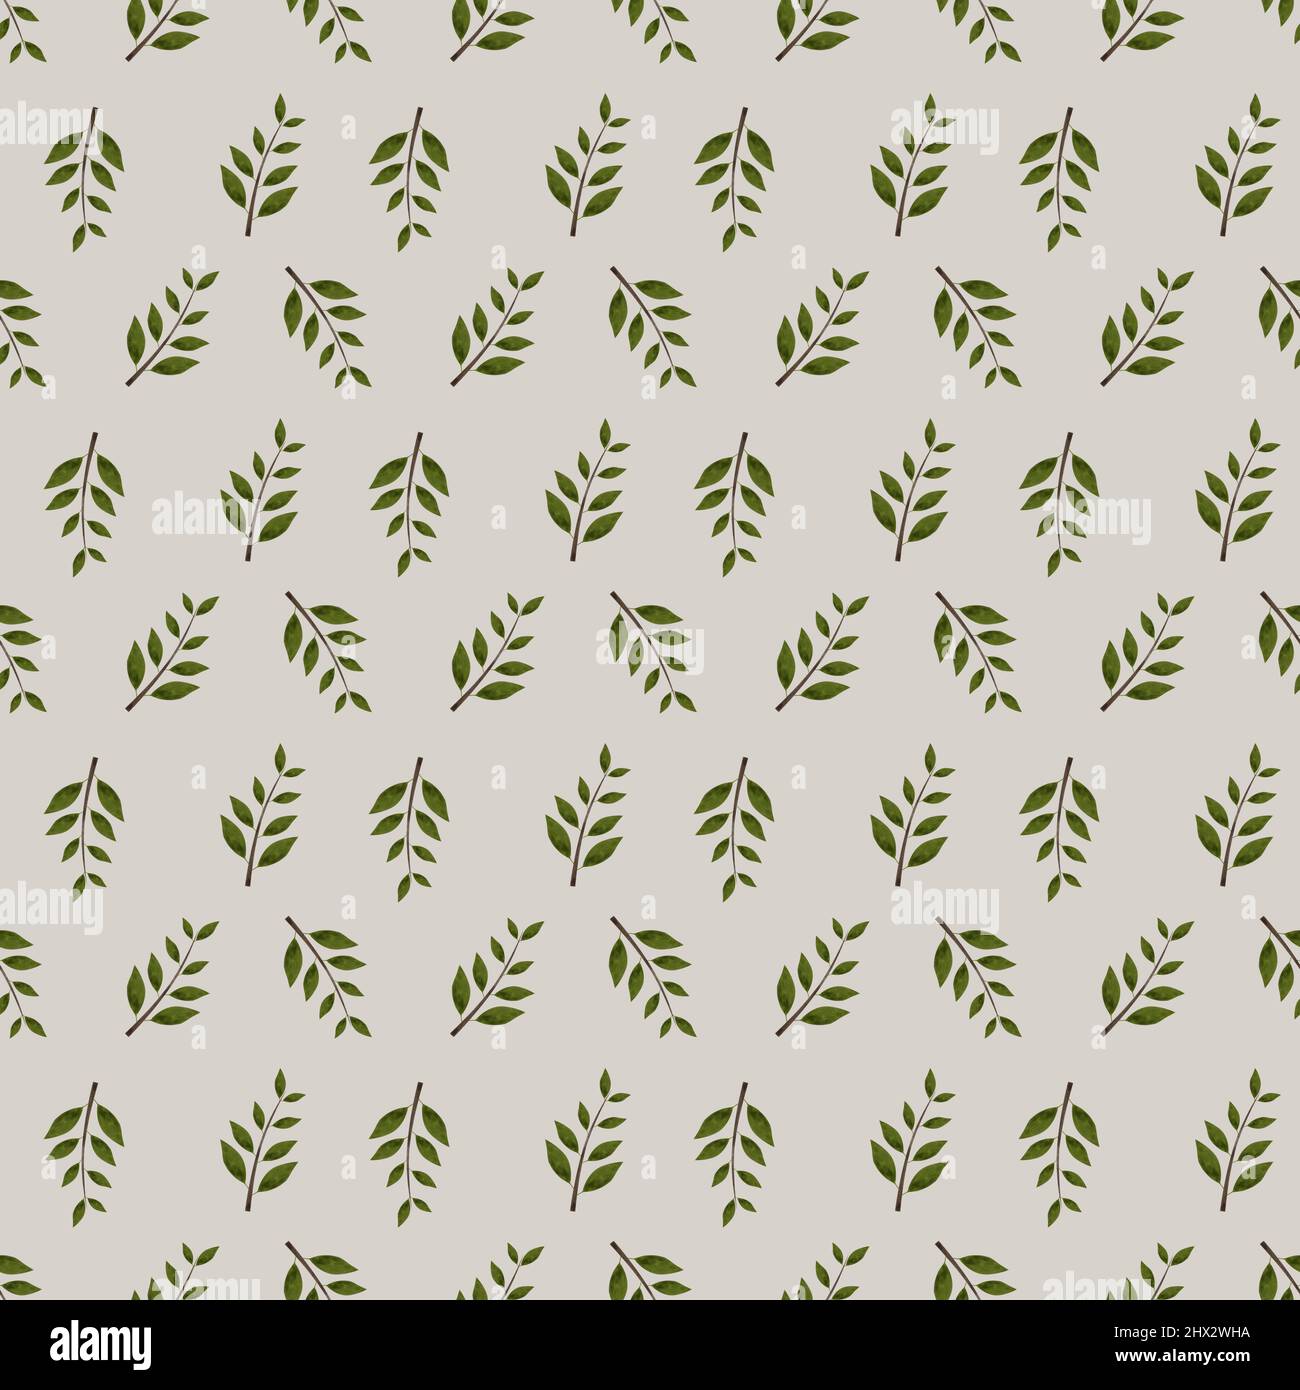 Seamless foliage pattern, Tree branch backdrop, Natural seamless wallpaper, Textile print. Green leaves background, Simple tree ornament Stock Photo